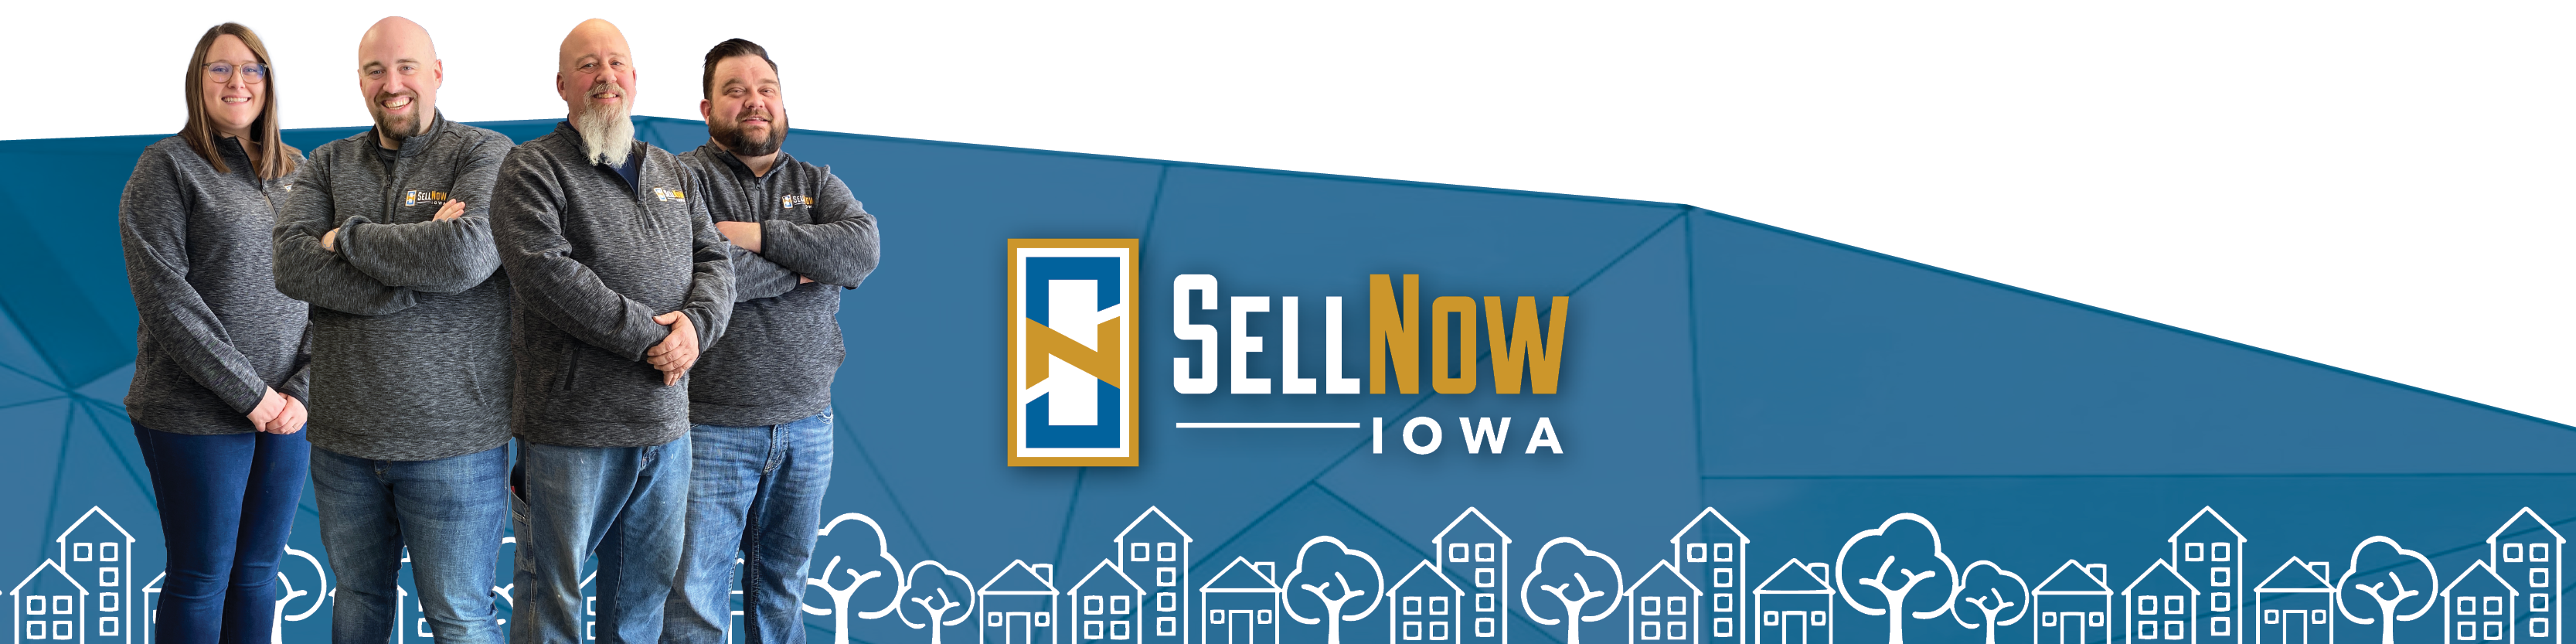 Join the Team | Sell Now Iowa